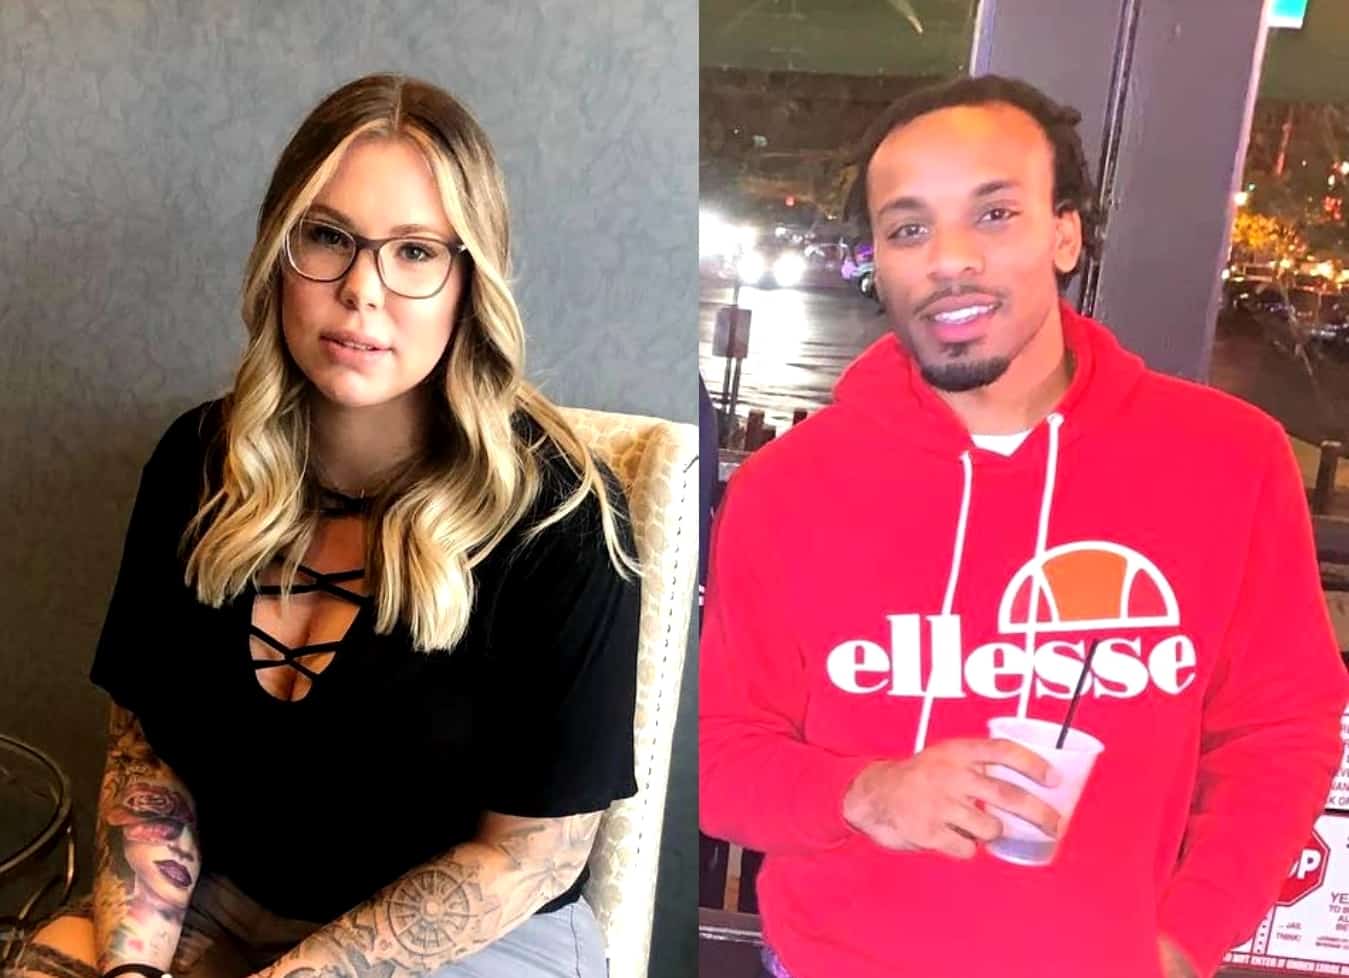 Teen Mom 2's Kailyn Lowry Was Arrested, Accused of Punching Ex-Boyfriend Chris Lopez "Several Times" After He Cut Their Son Lux's Hair, Find Out What She Told Police About Their Dispute